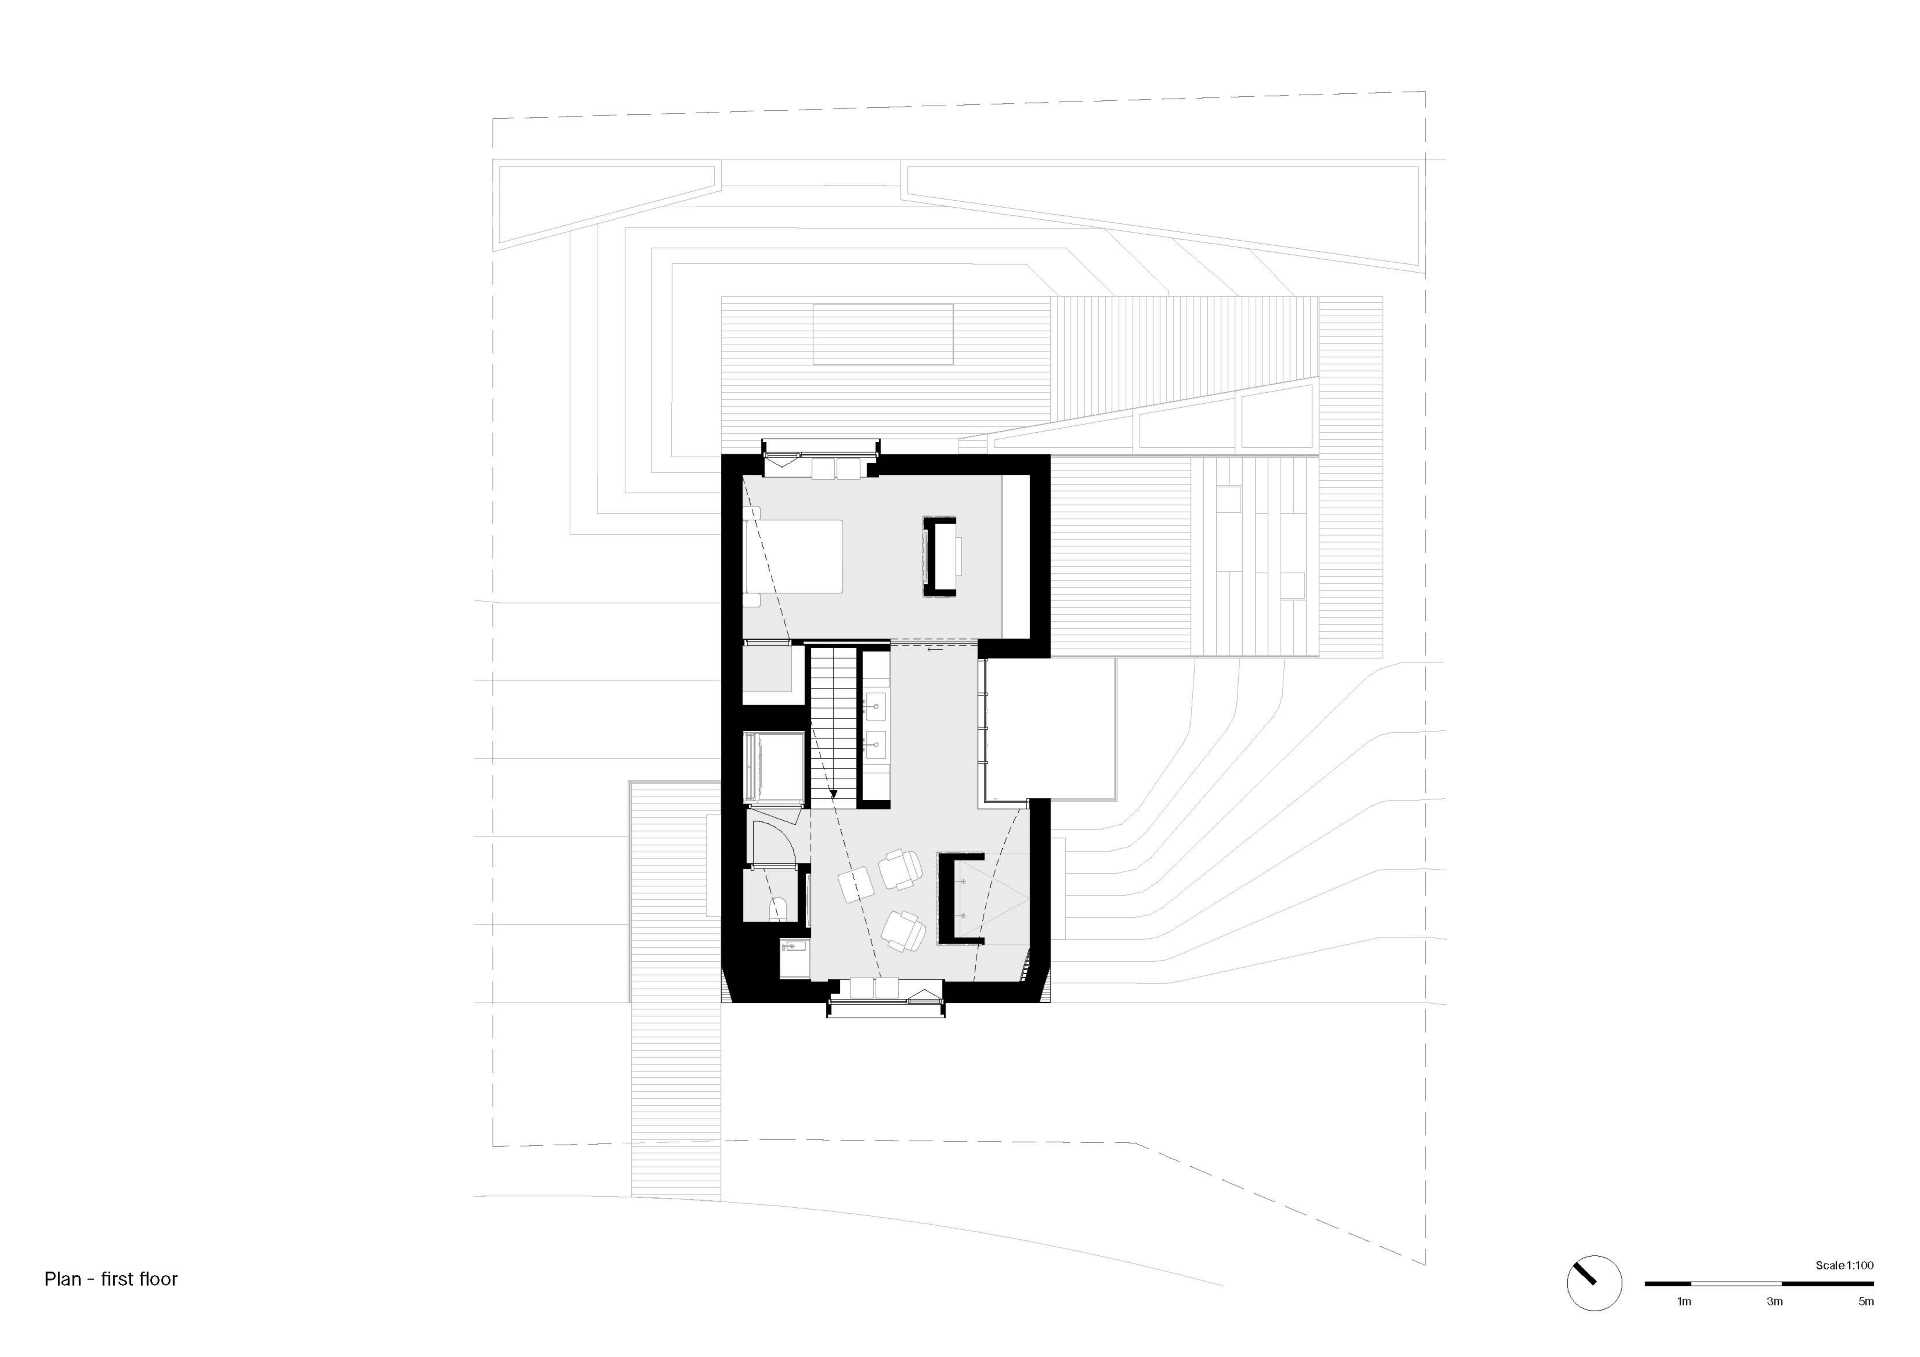 The first floor plan of a modern house.